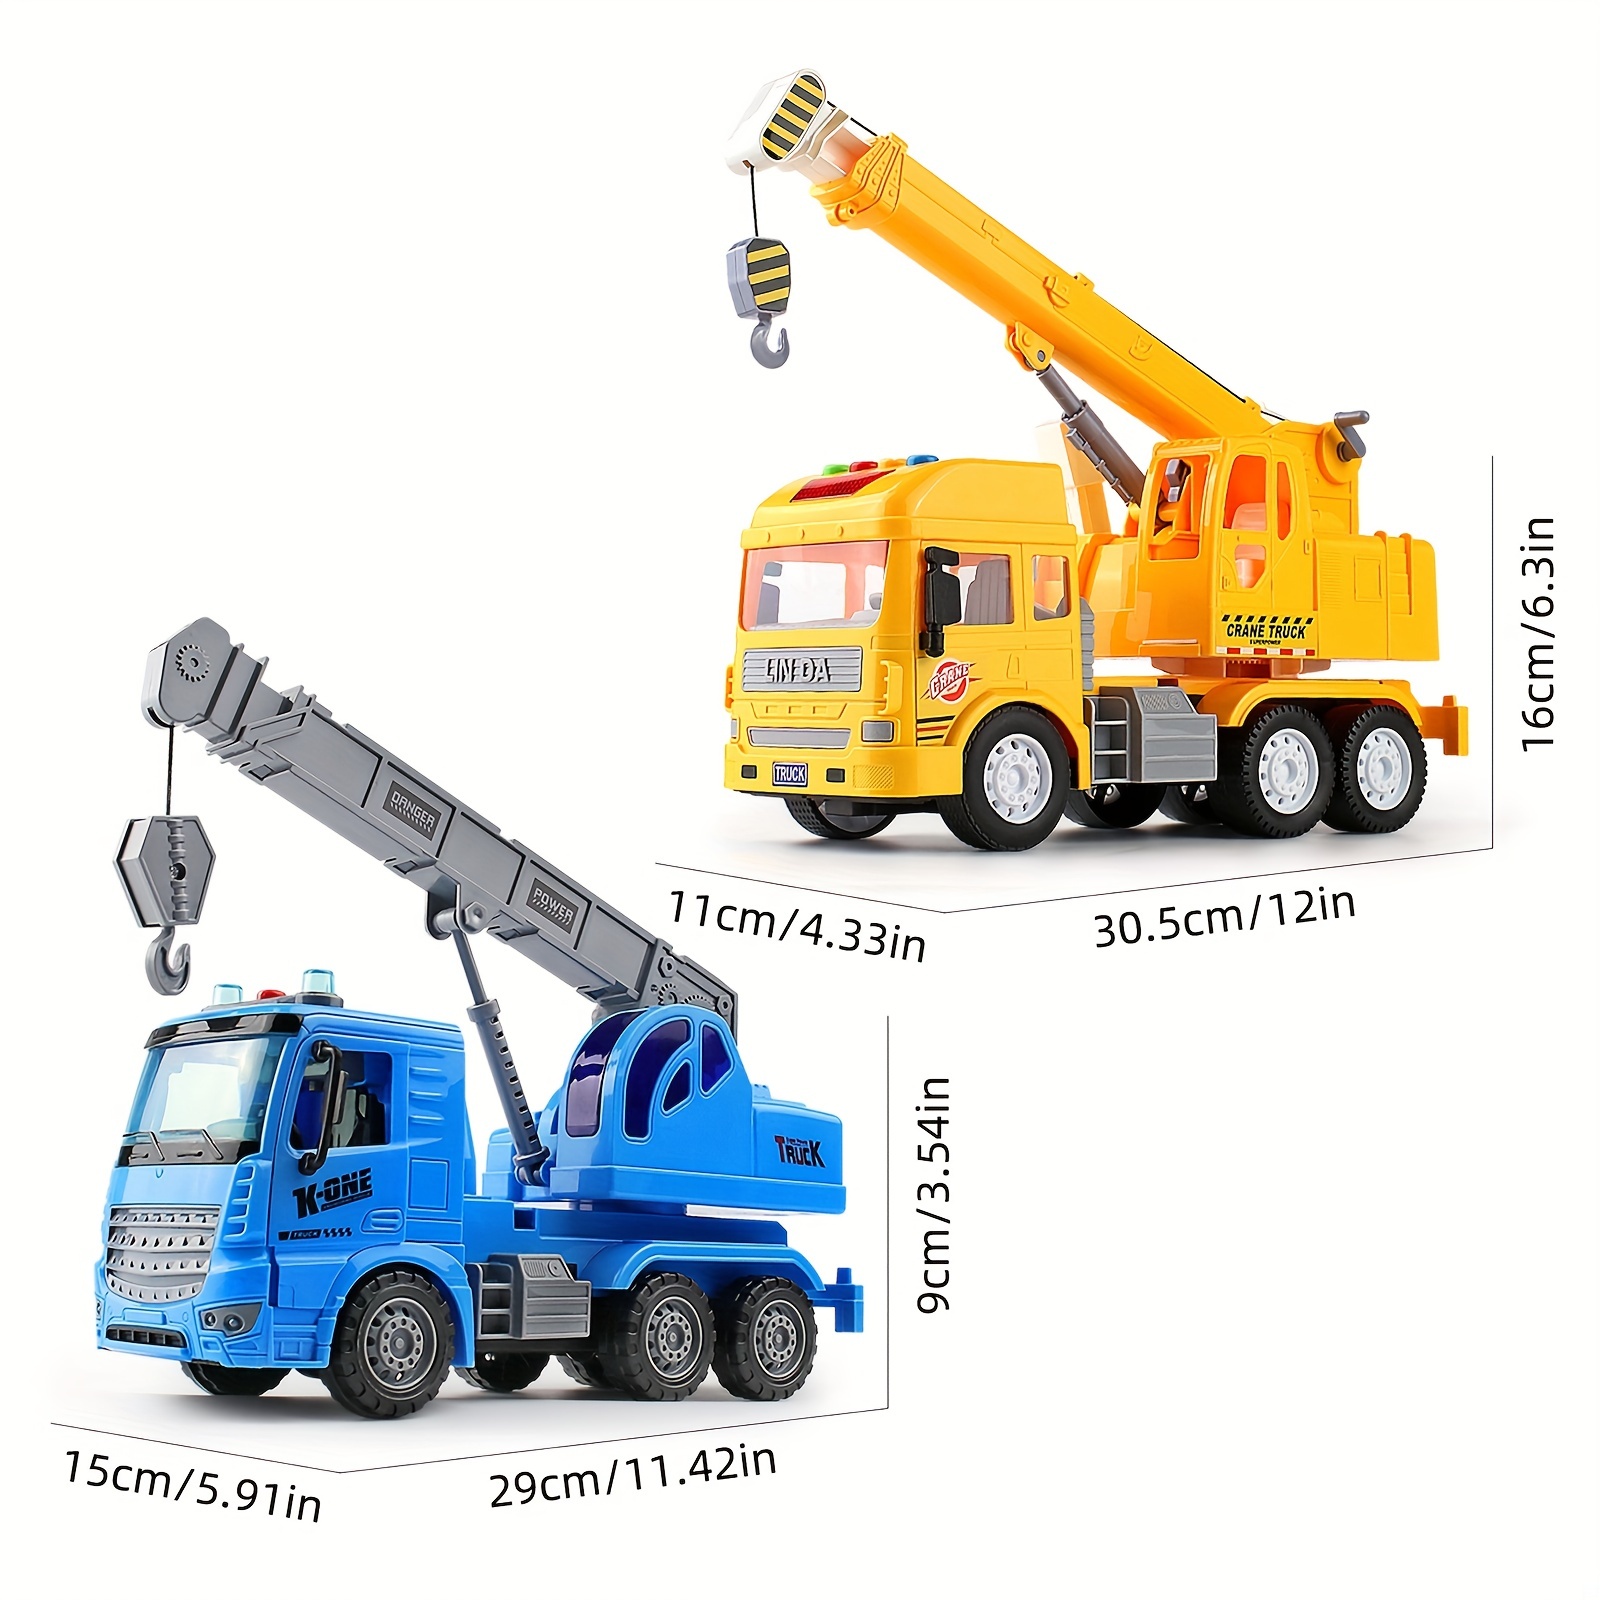 ArtCreativity Light Up Crane Truck Toy, Kids' Construction Toy with a  Movable Crane, LEDs, and Sound Effects, Push and Go Construction Vehicle  Toys